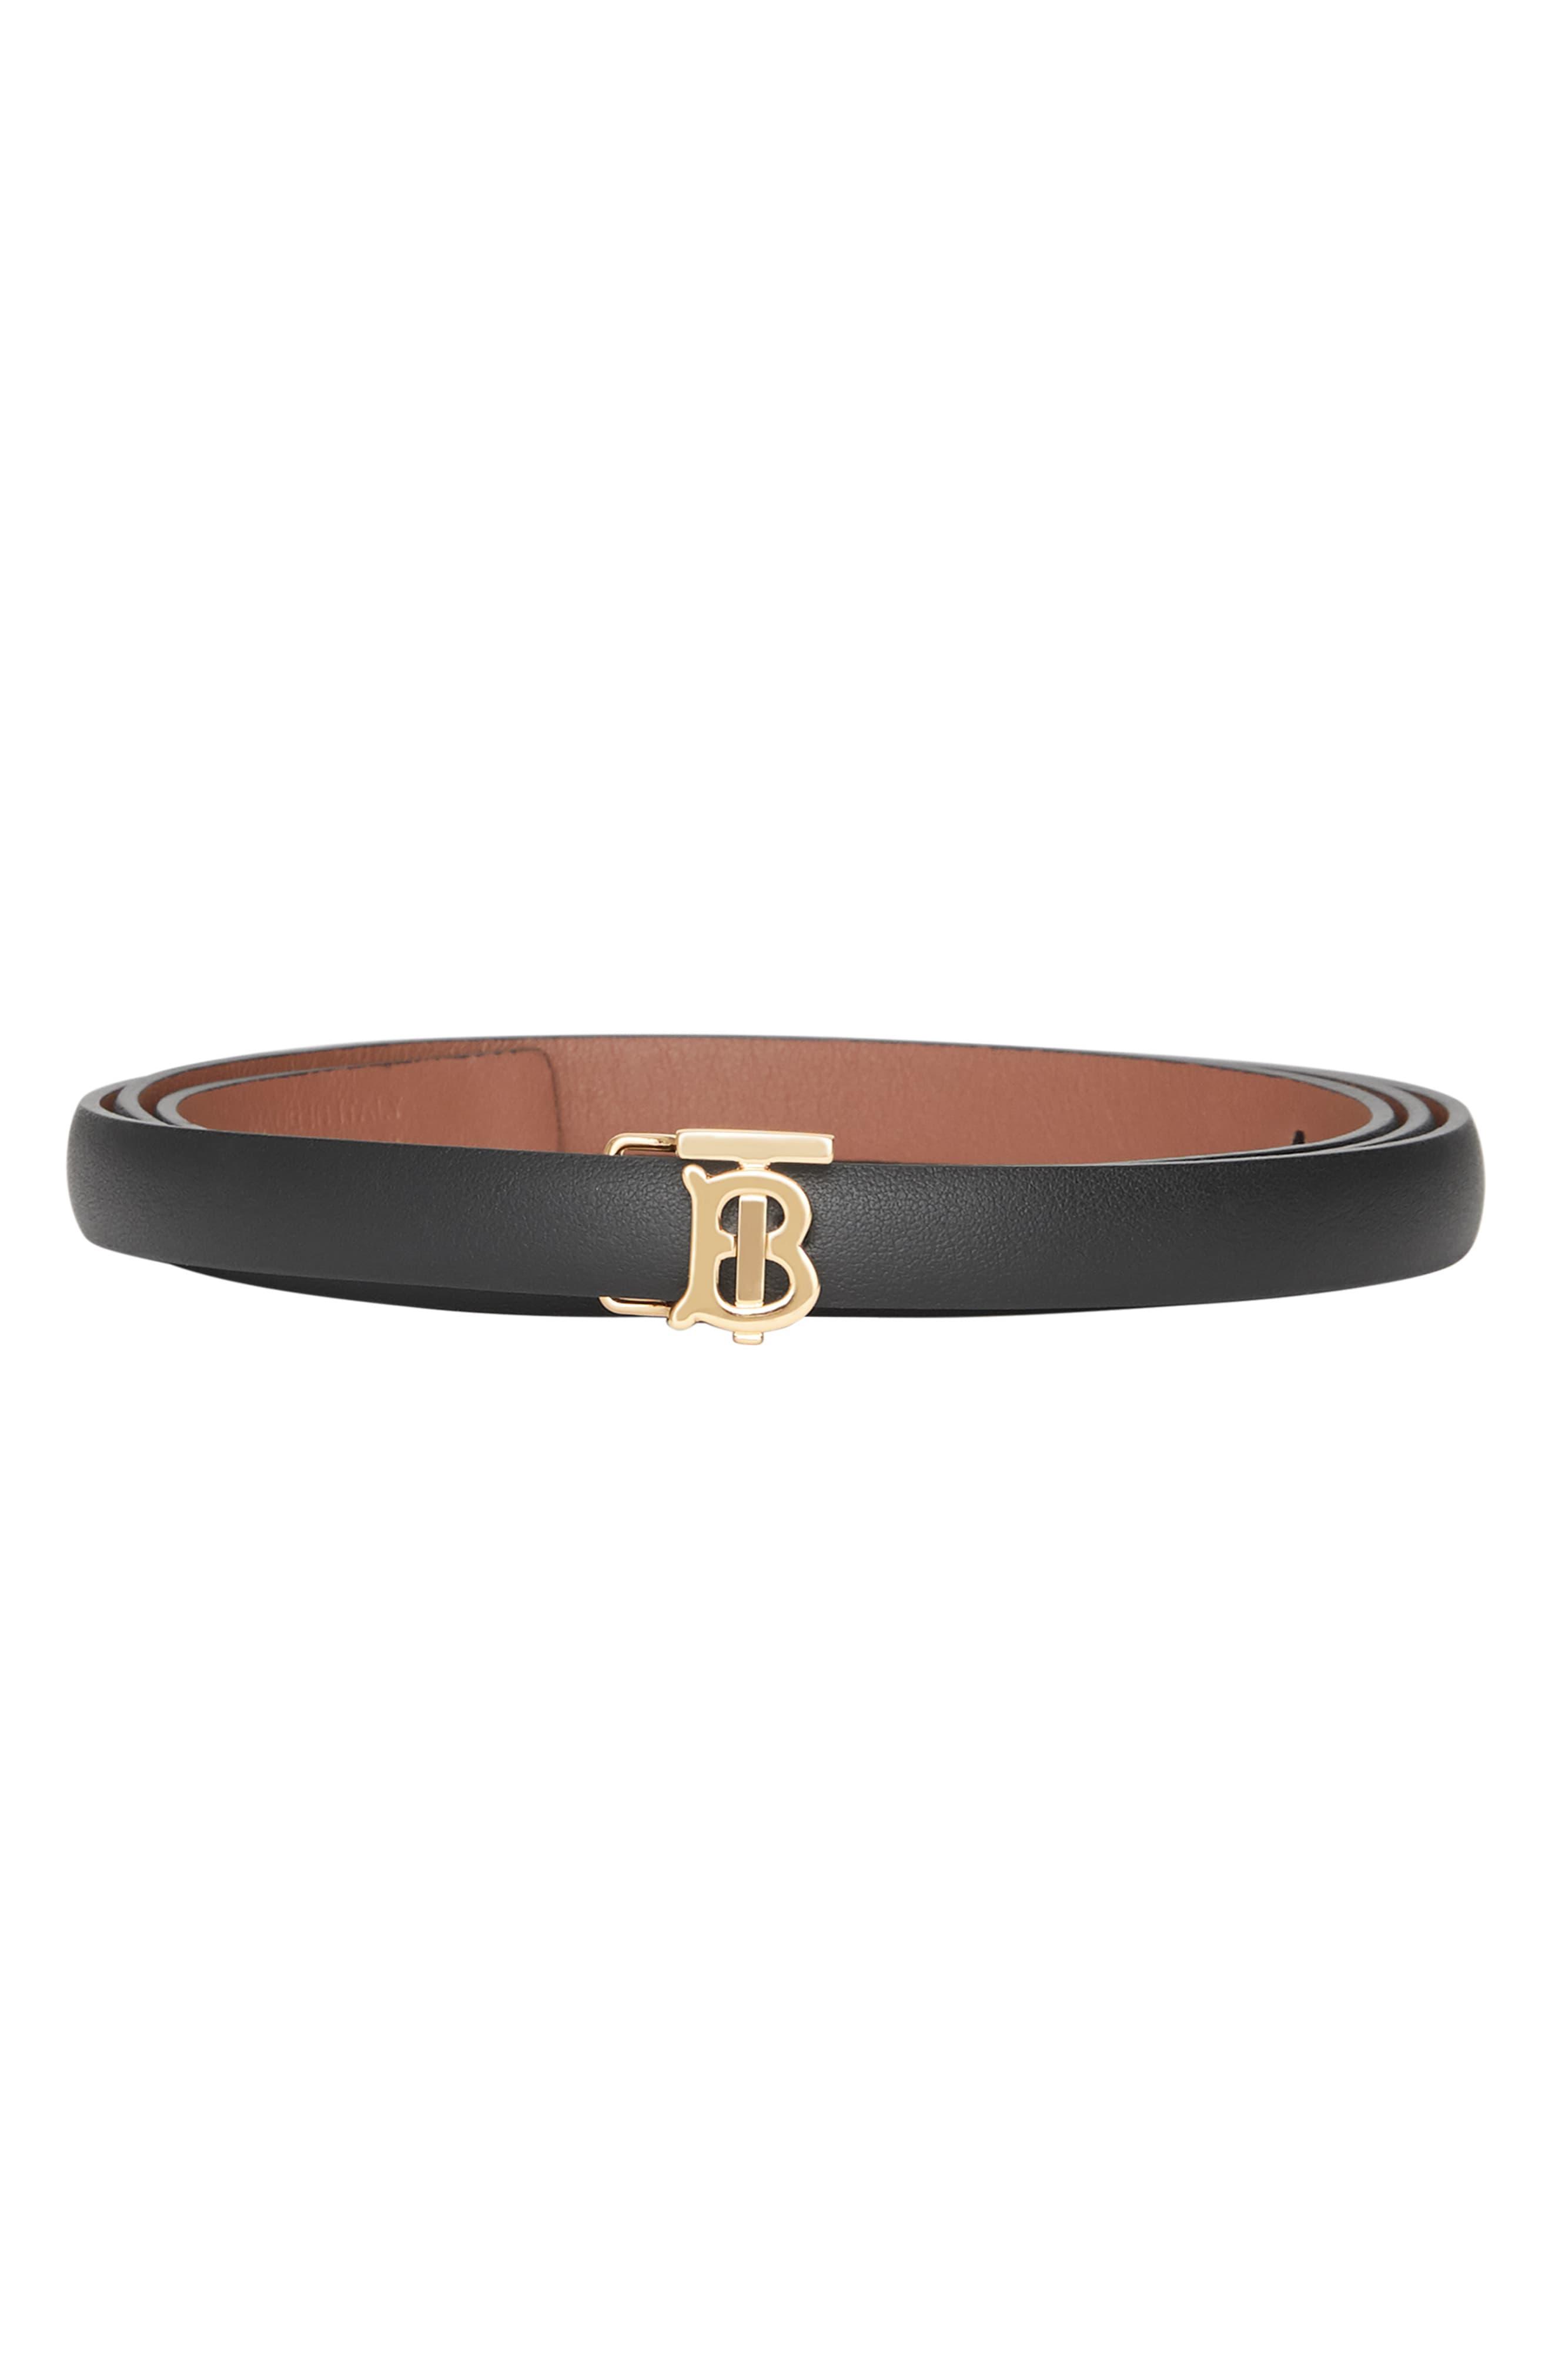 Burberry Tb Monogram Reversible Leather Belt in Brown - Lyst